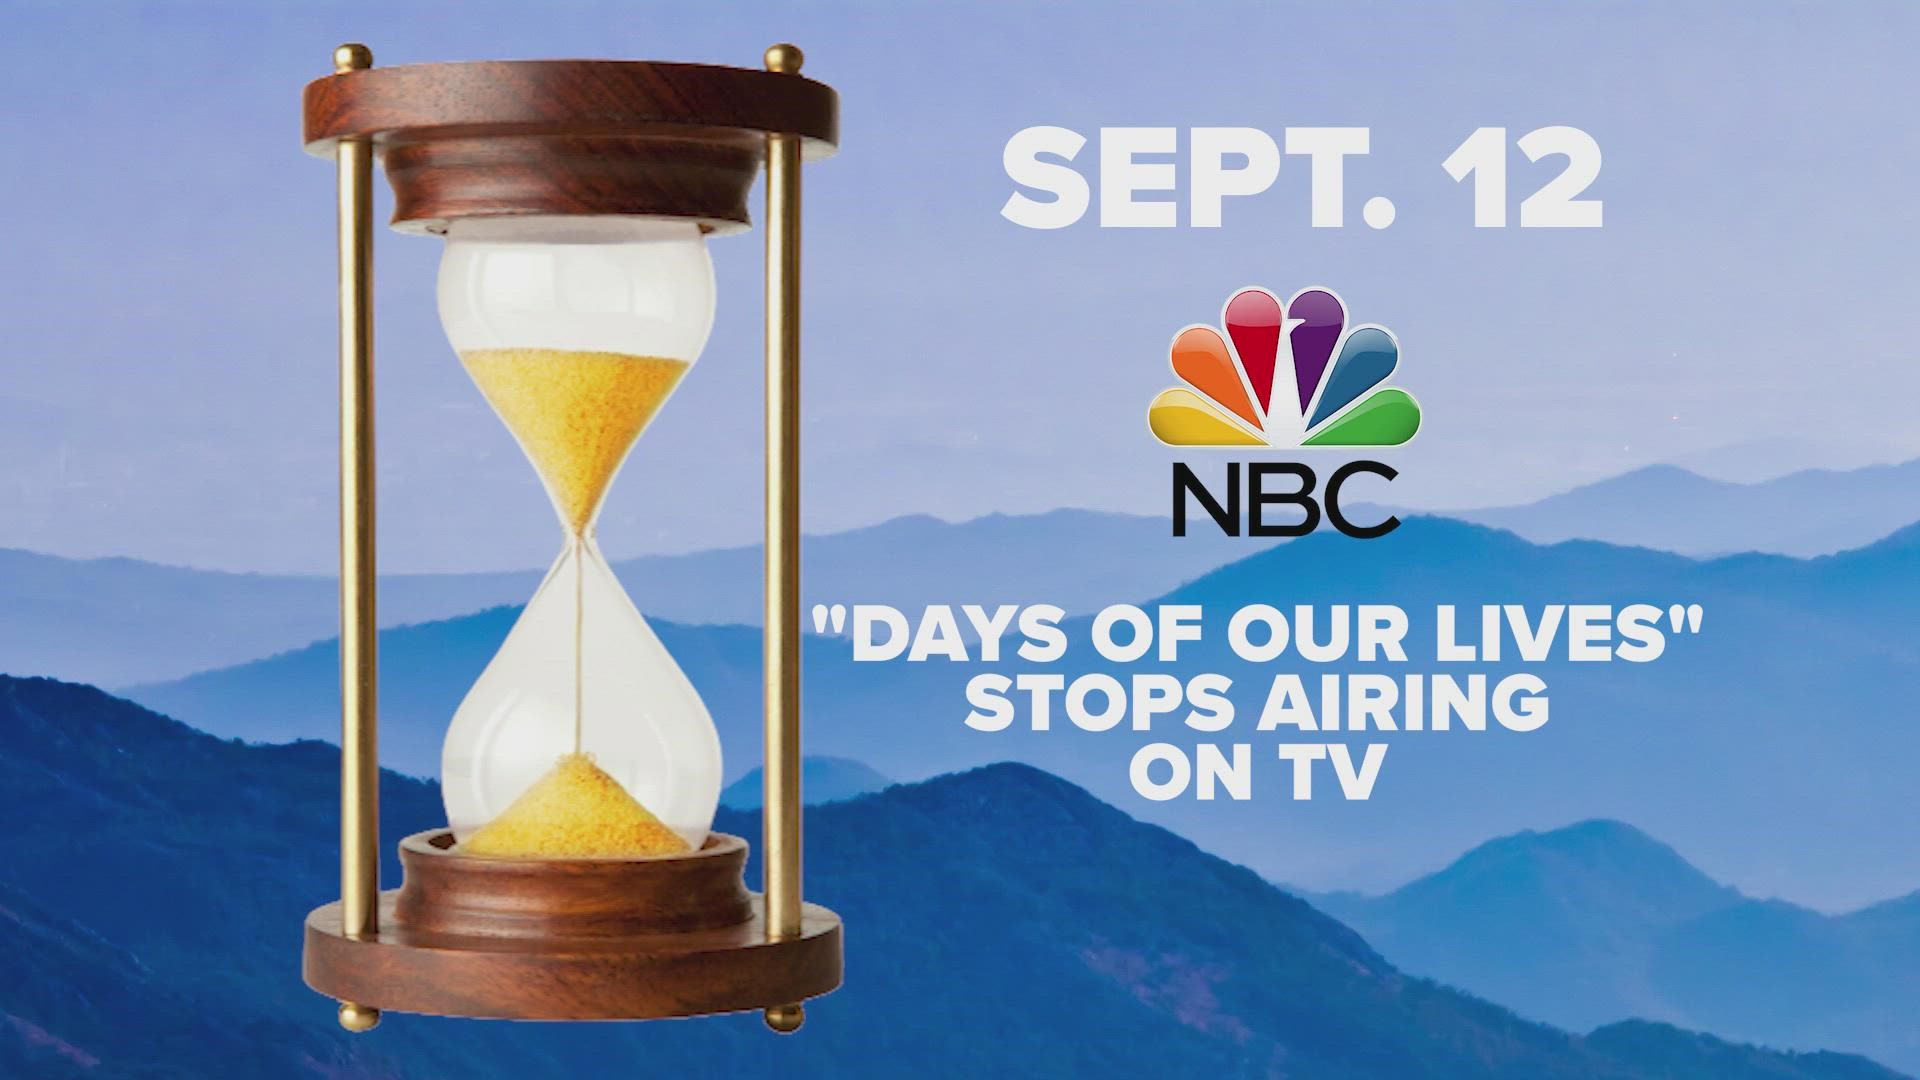 NBC has set up a toll-free customer care line for Days fans: 855-597-1827.